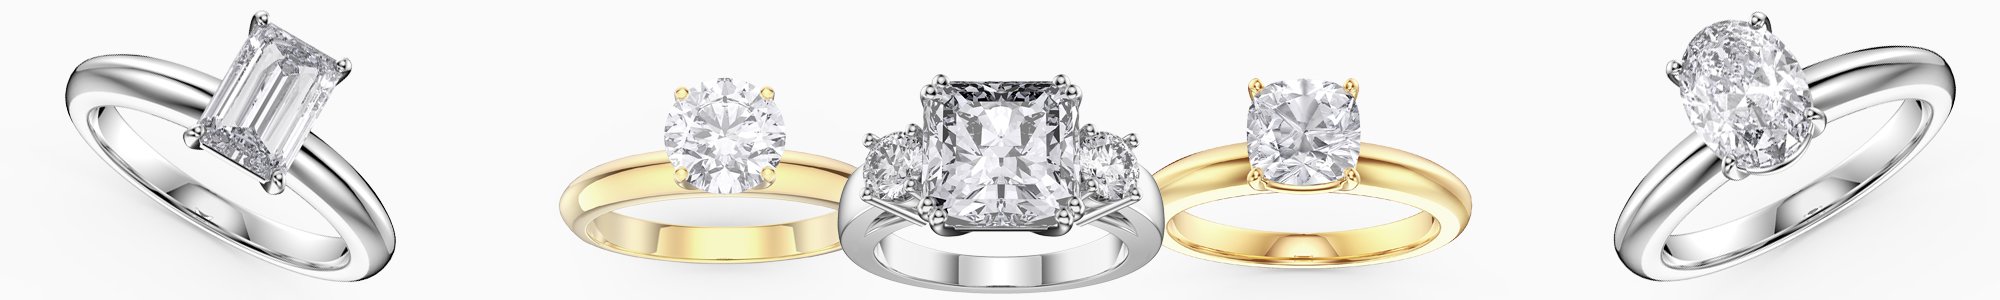 Shop Diamond Solitaire Rings by Jian London. Buy direct and save from our wide selection of Solitaire Rings at the Jian London jewelry Store. Free US Delivery